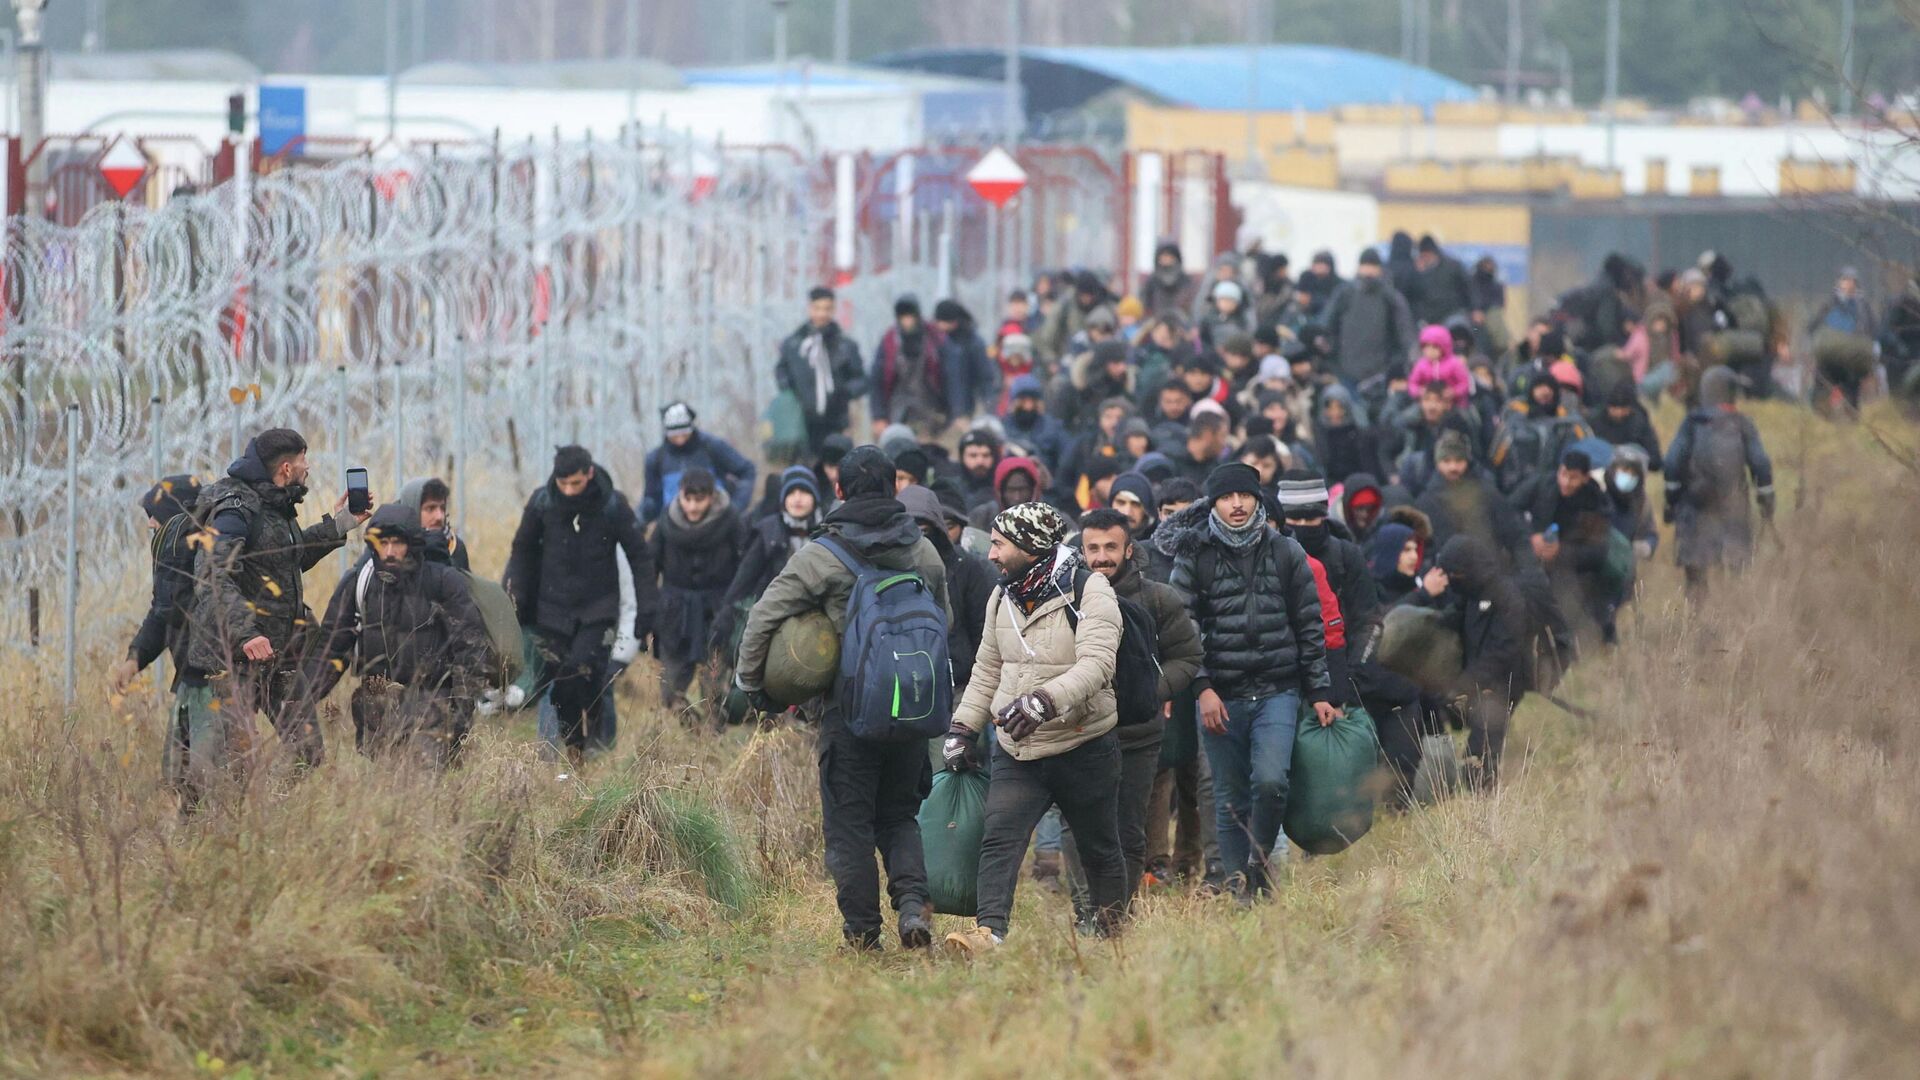 A group of migrants walk near a barbed wire fence while moving toward a makeshift camp on the Belarusian-Polish border in the Grodno region, Belarus November 12, 2021. Leonid Scheglov/BelTA/Handout via REUTERS  ATTENTION EDITORS - THIS IMAGE HAS BEEN SUPPLIED BY A THIRD PARTY. NO RESALES. NO ARCHIVE. MANDATORY CREDIT. - Sputnik International, 1920, 21.11.2021